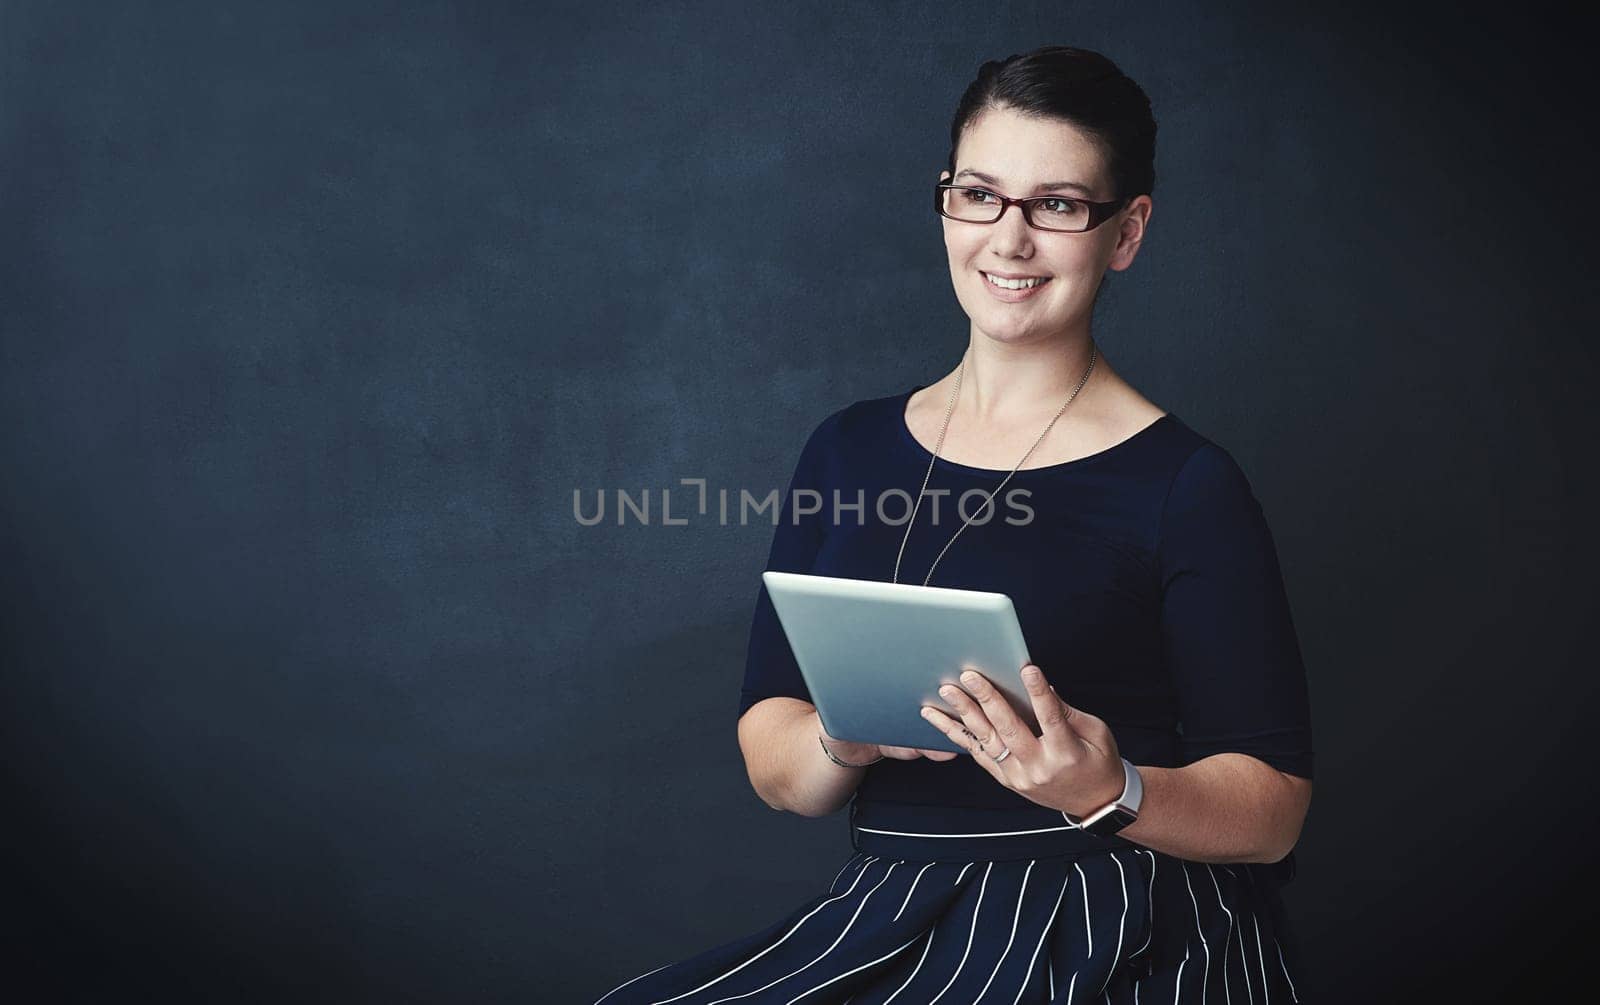 Innovation is always on her mind. Studio portrait of a corporate businesswoman using a digital tablet against a dark background